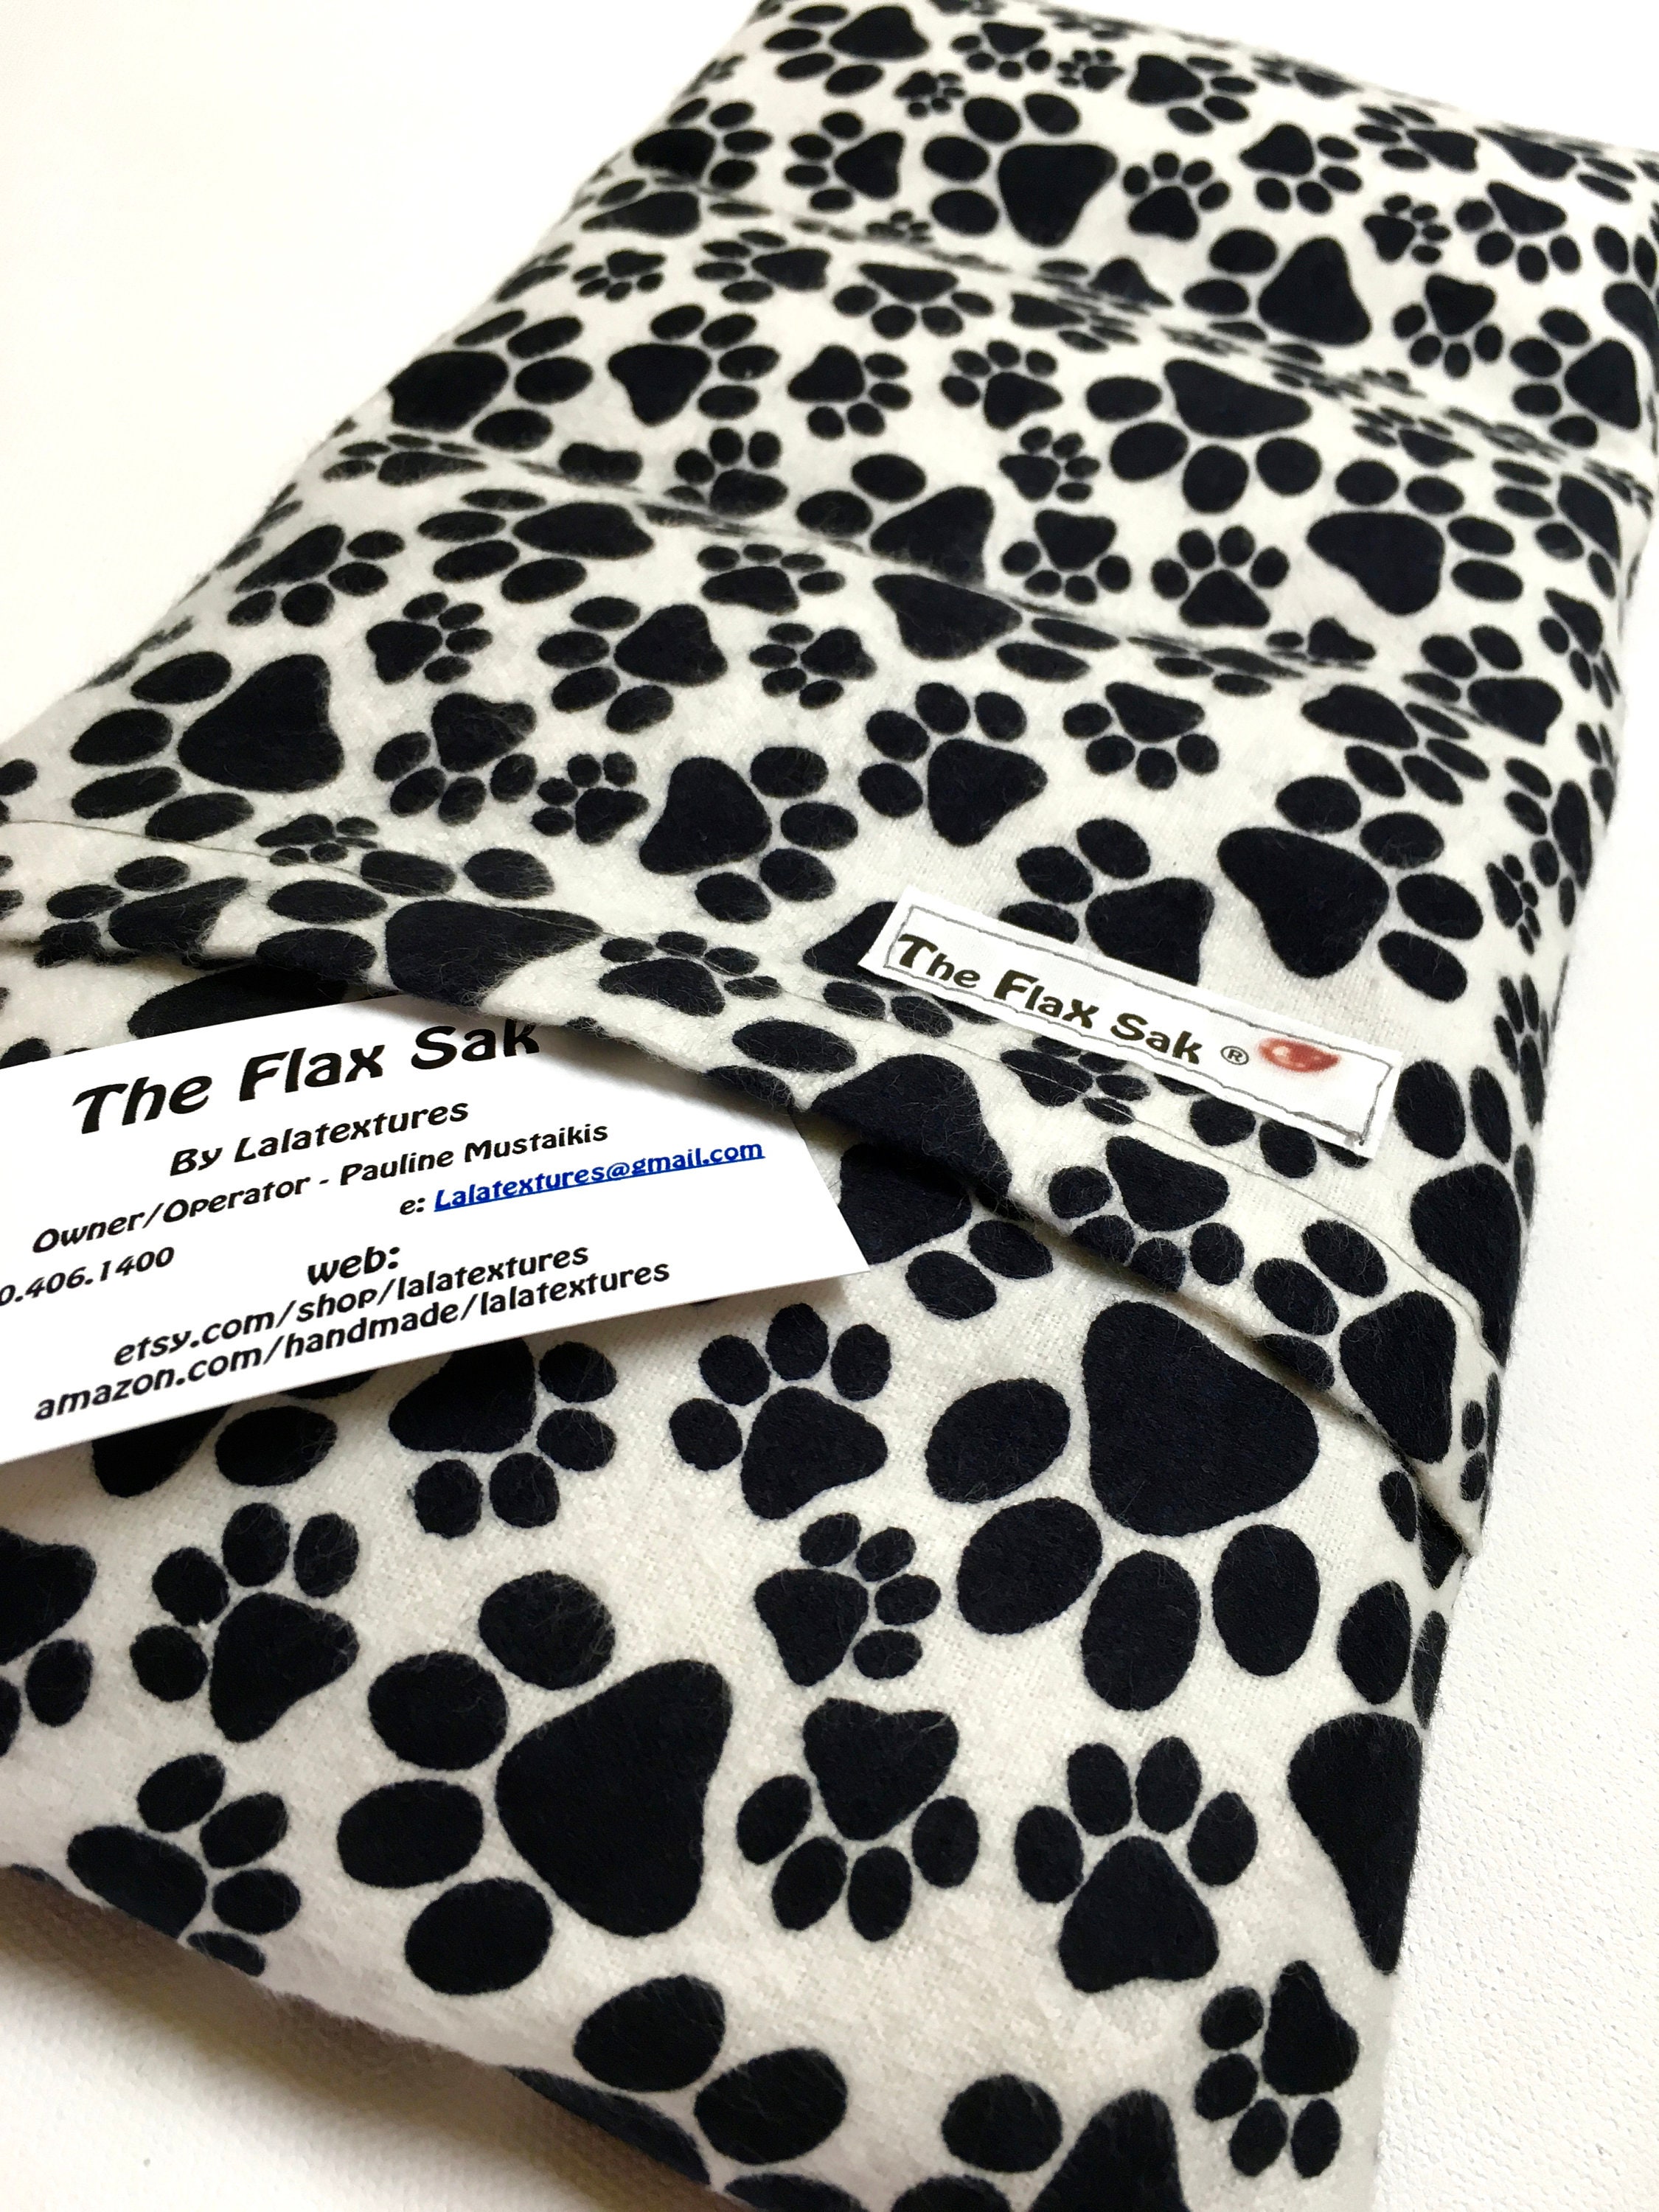 XL Flax Heating Pad Microwave the Flax Sak Washable Covers | Etsy